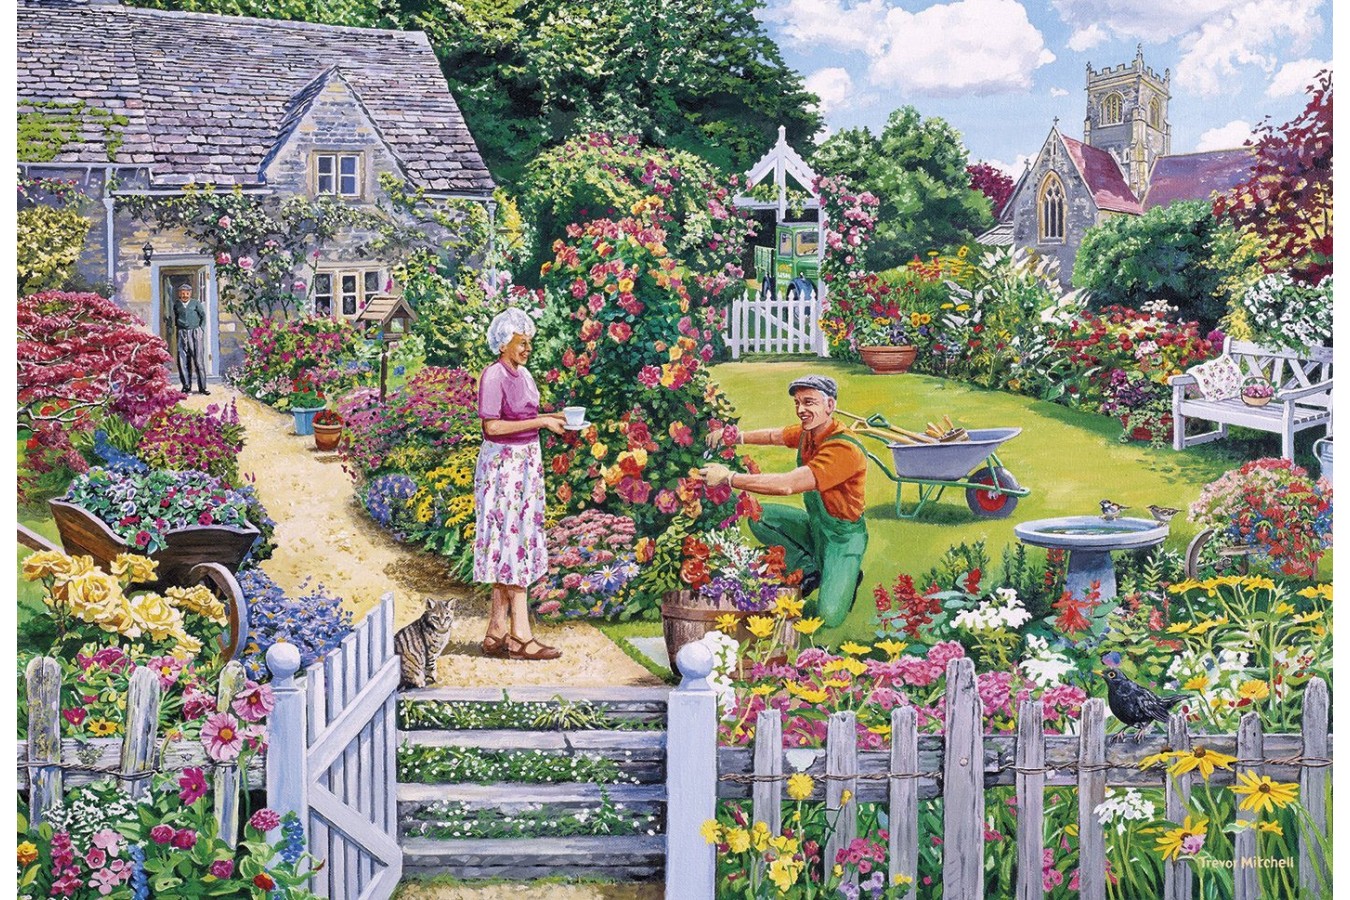 Puzzle Gibsons - The Gardener's Round, 4x500 piese (65100)